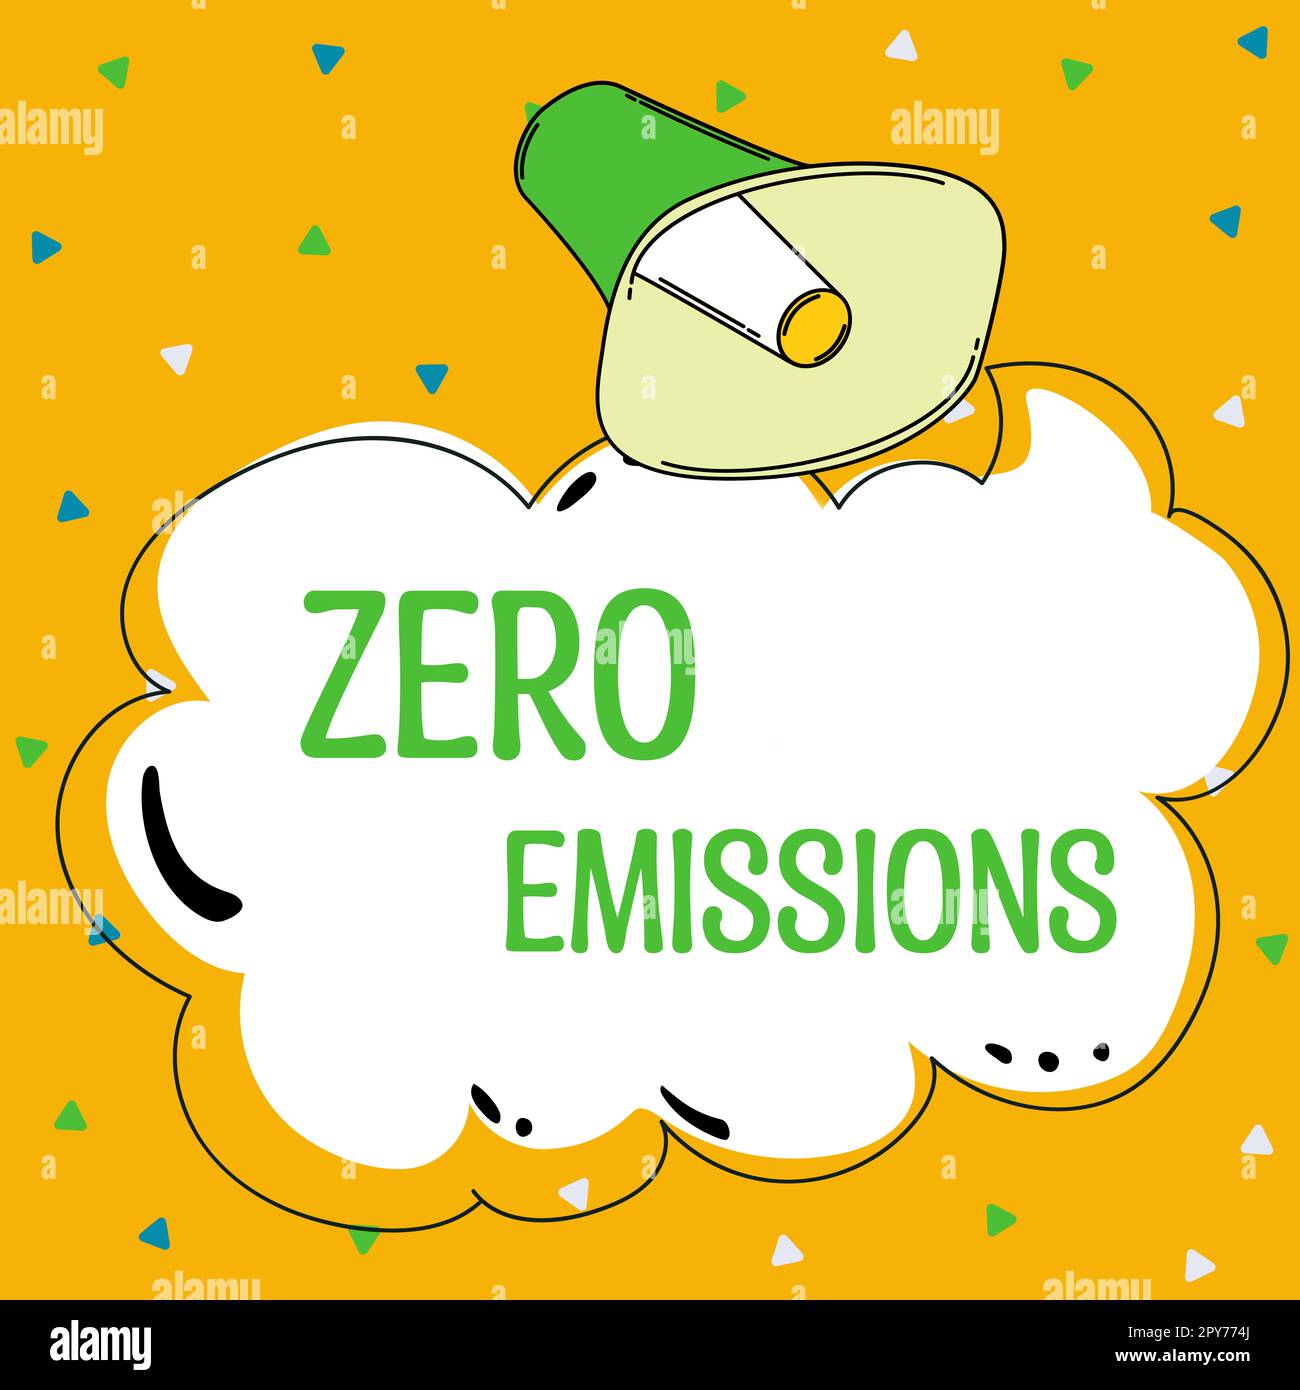 Sign displaying Zero Emissions. Word for emits no waste products that pollute the environment Stock Photo